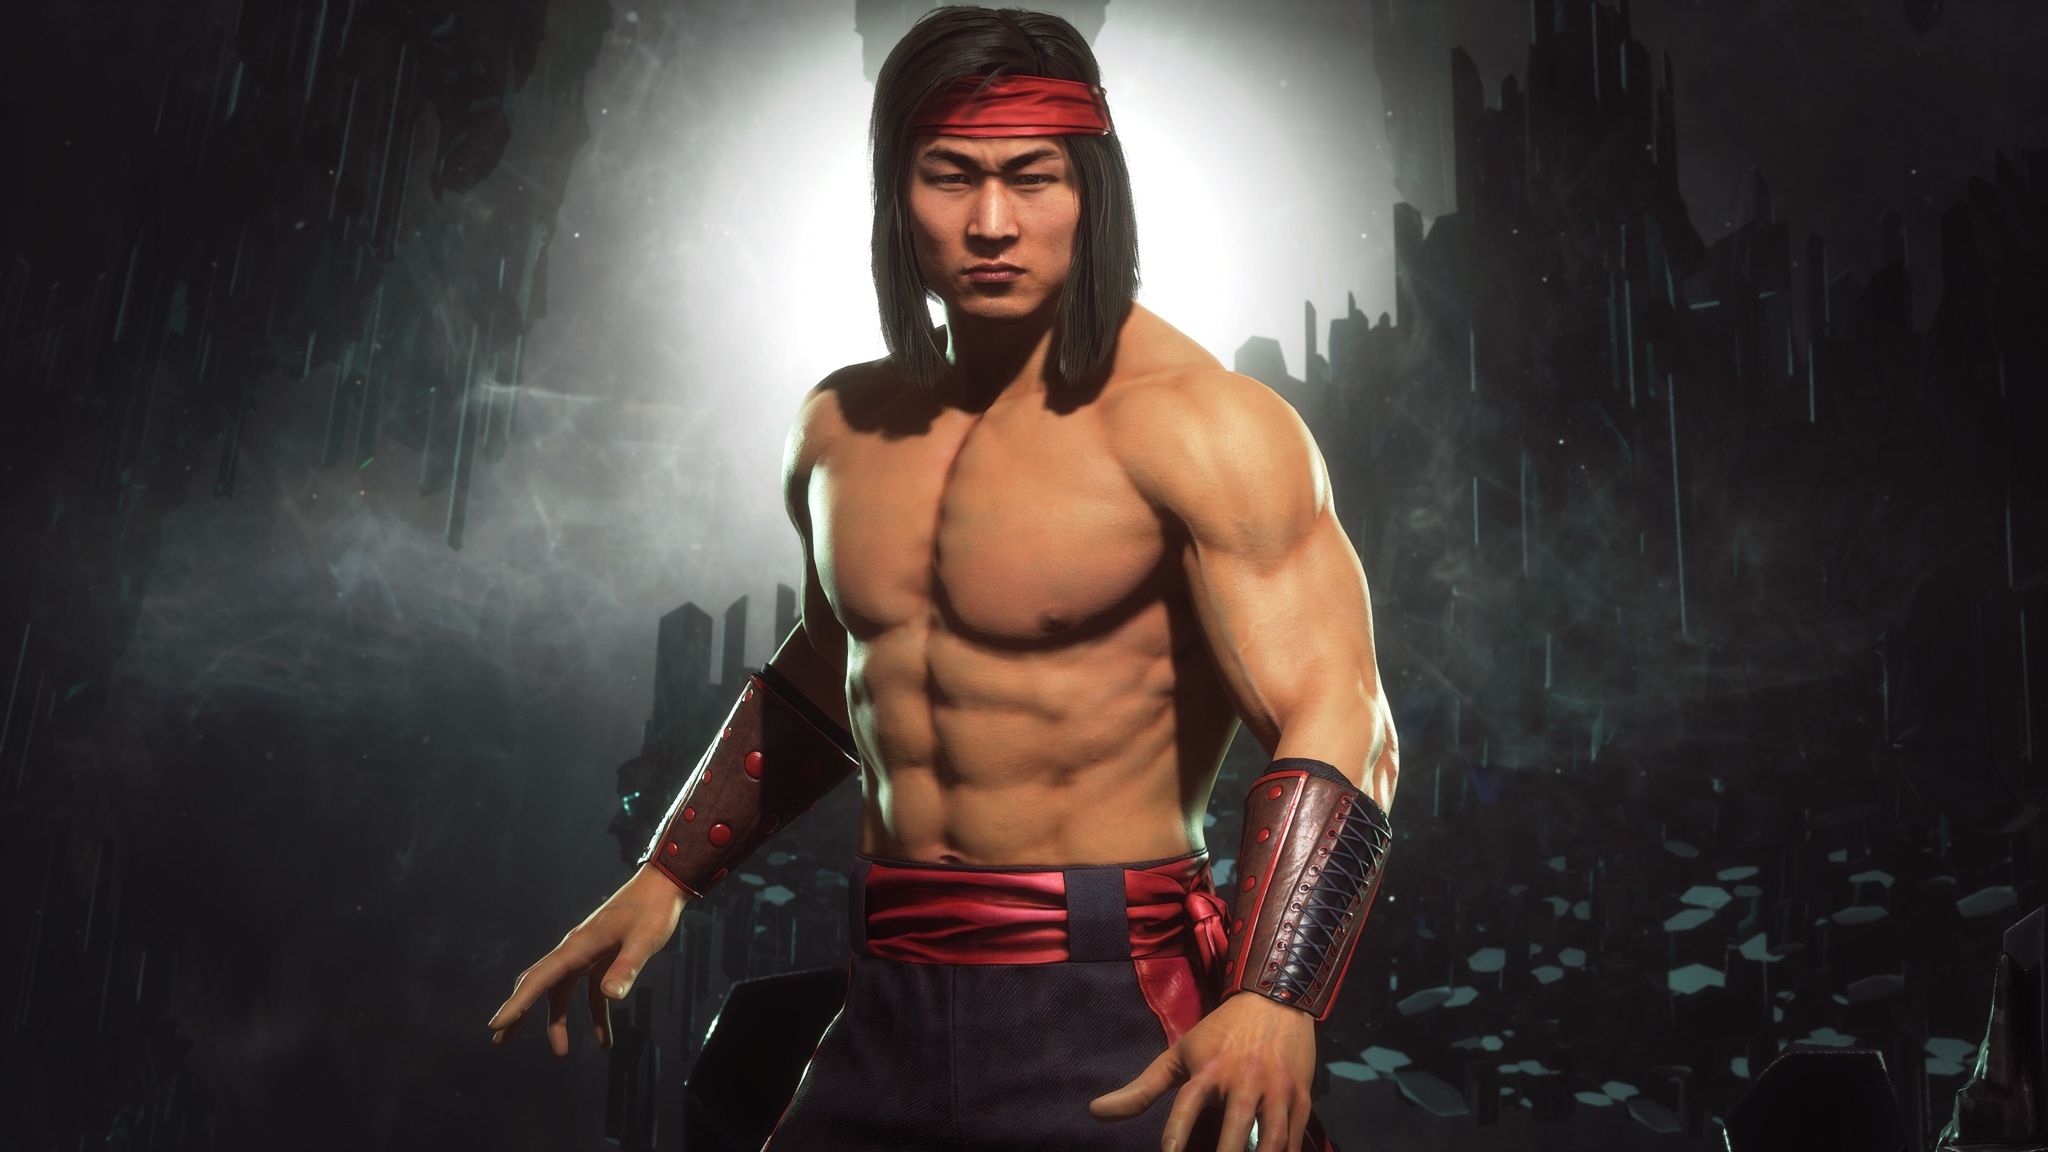 Does ppl hate liu kang becase he is too easy to play or becase his personality and character?